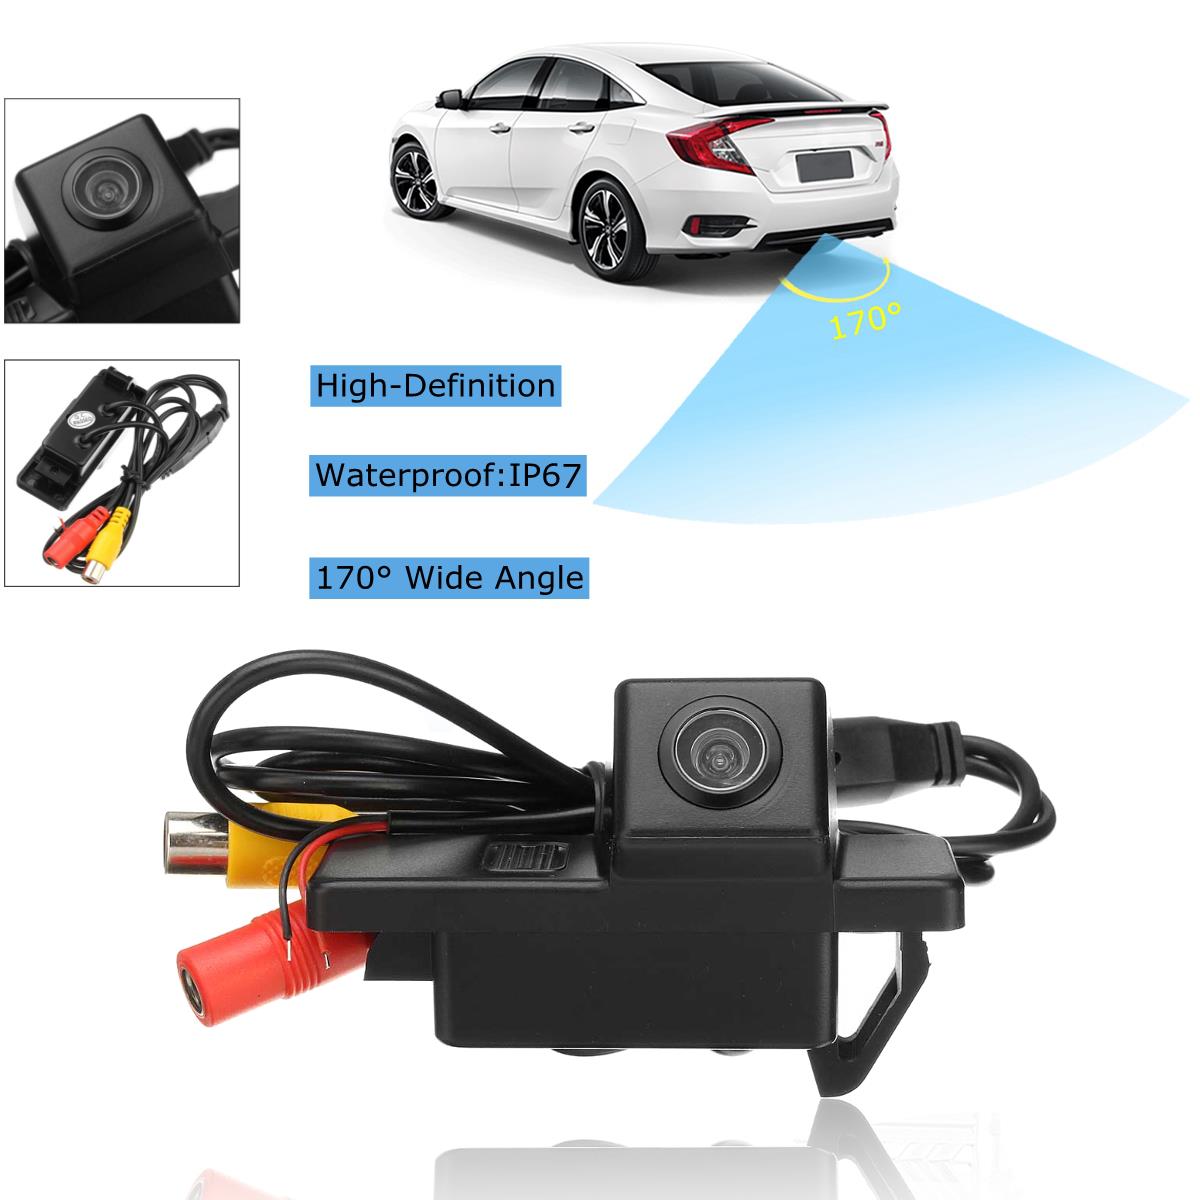 Car-Rear-View-Camera-with-170-Degree-Wide-for-Nissan-QASHQAI-X-TRAIL-Geniss-C4-C5-C-Triomphe-307cc-1328015